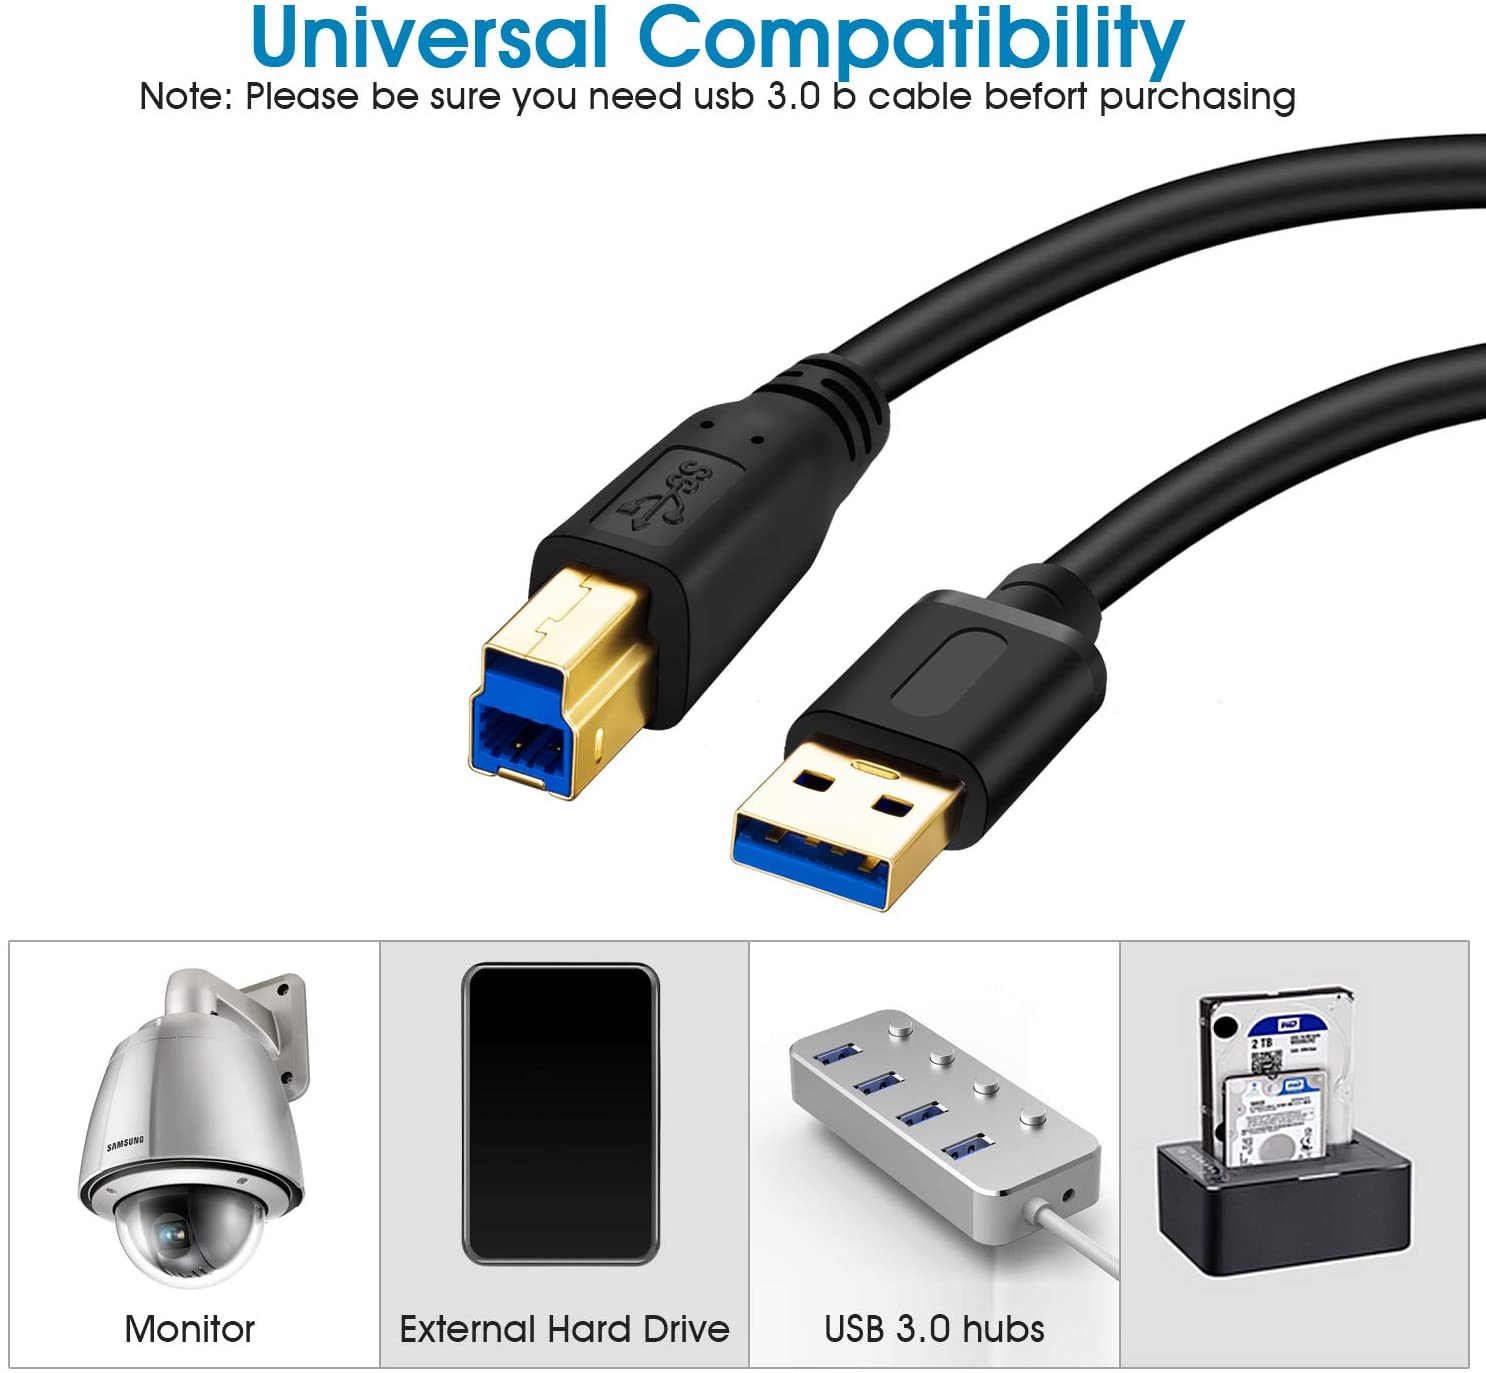 USB 3.0 A Male to B Male Cable For Scanners, Printers, Hard Drives